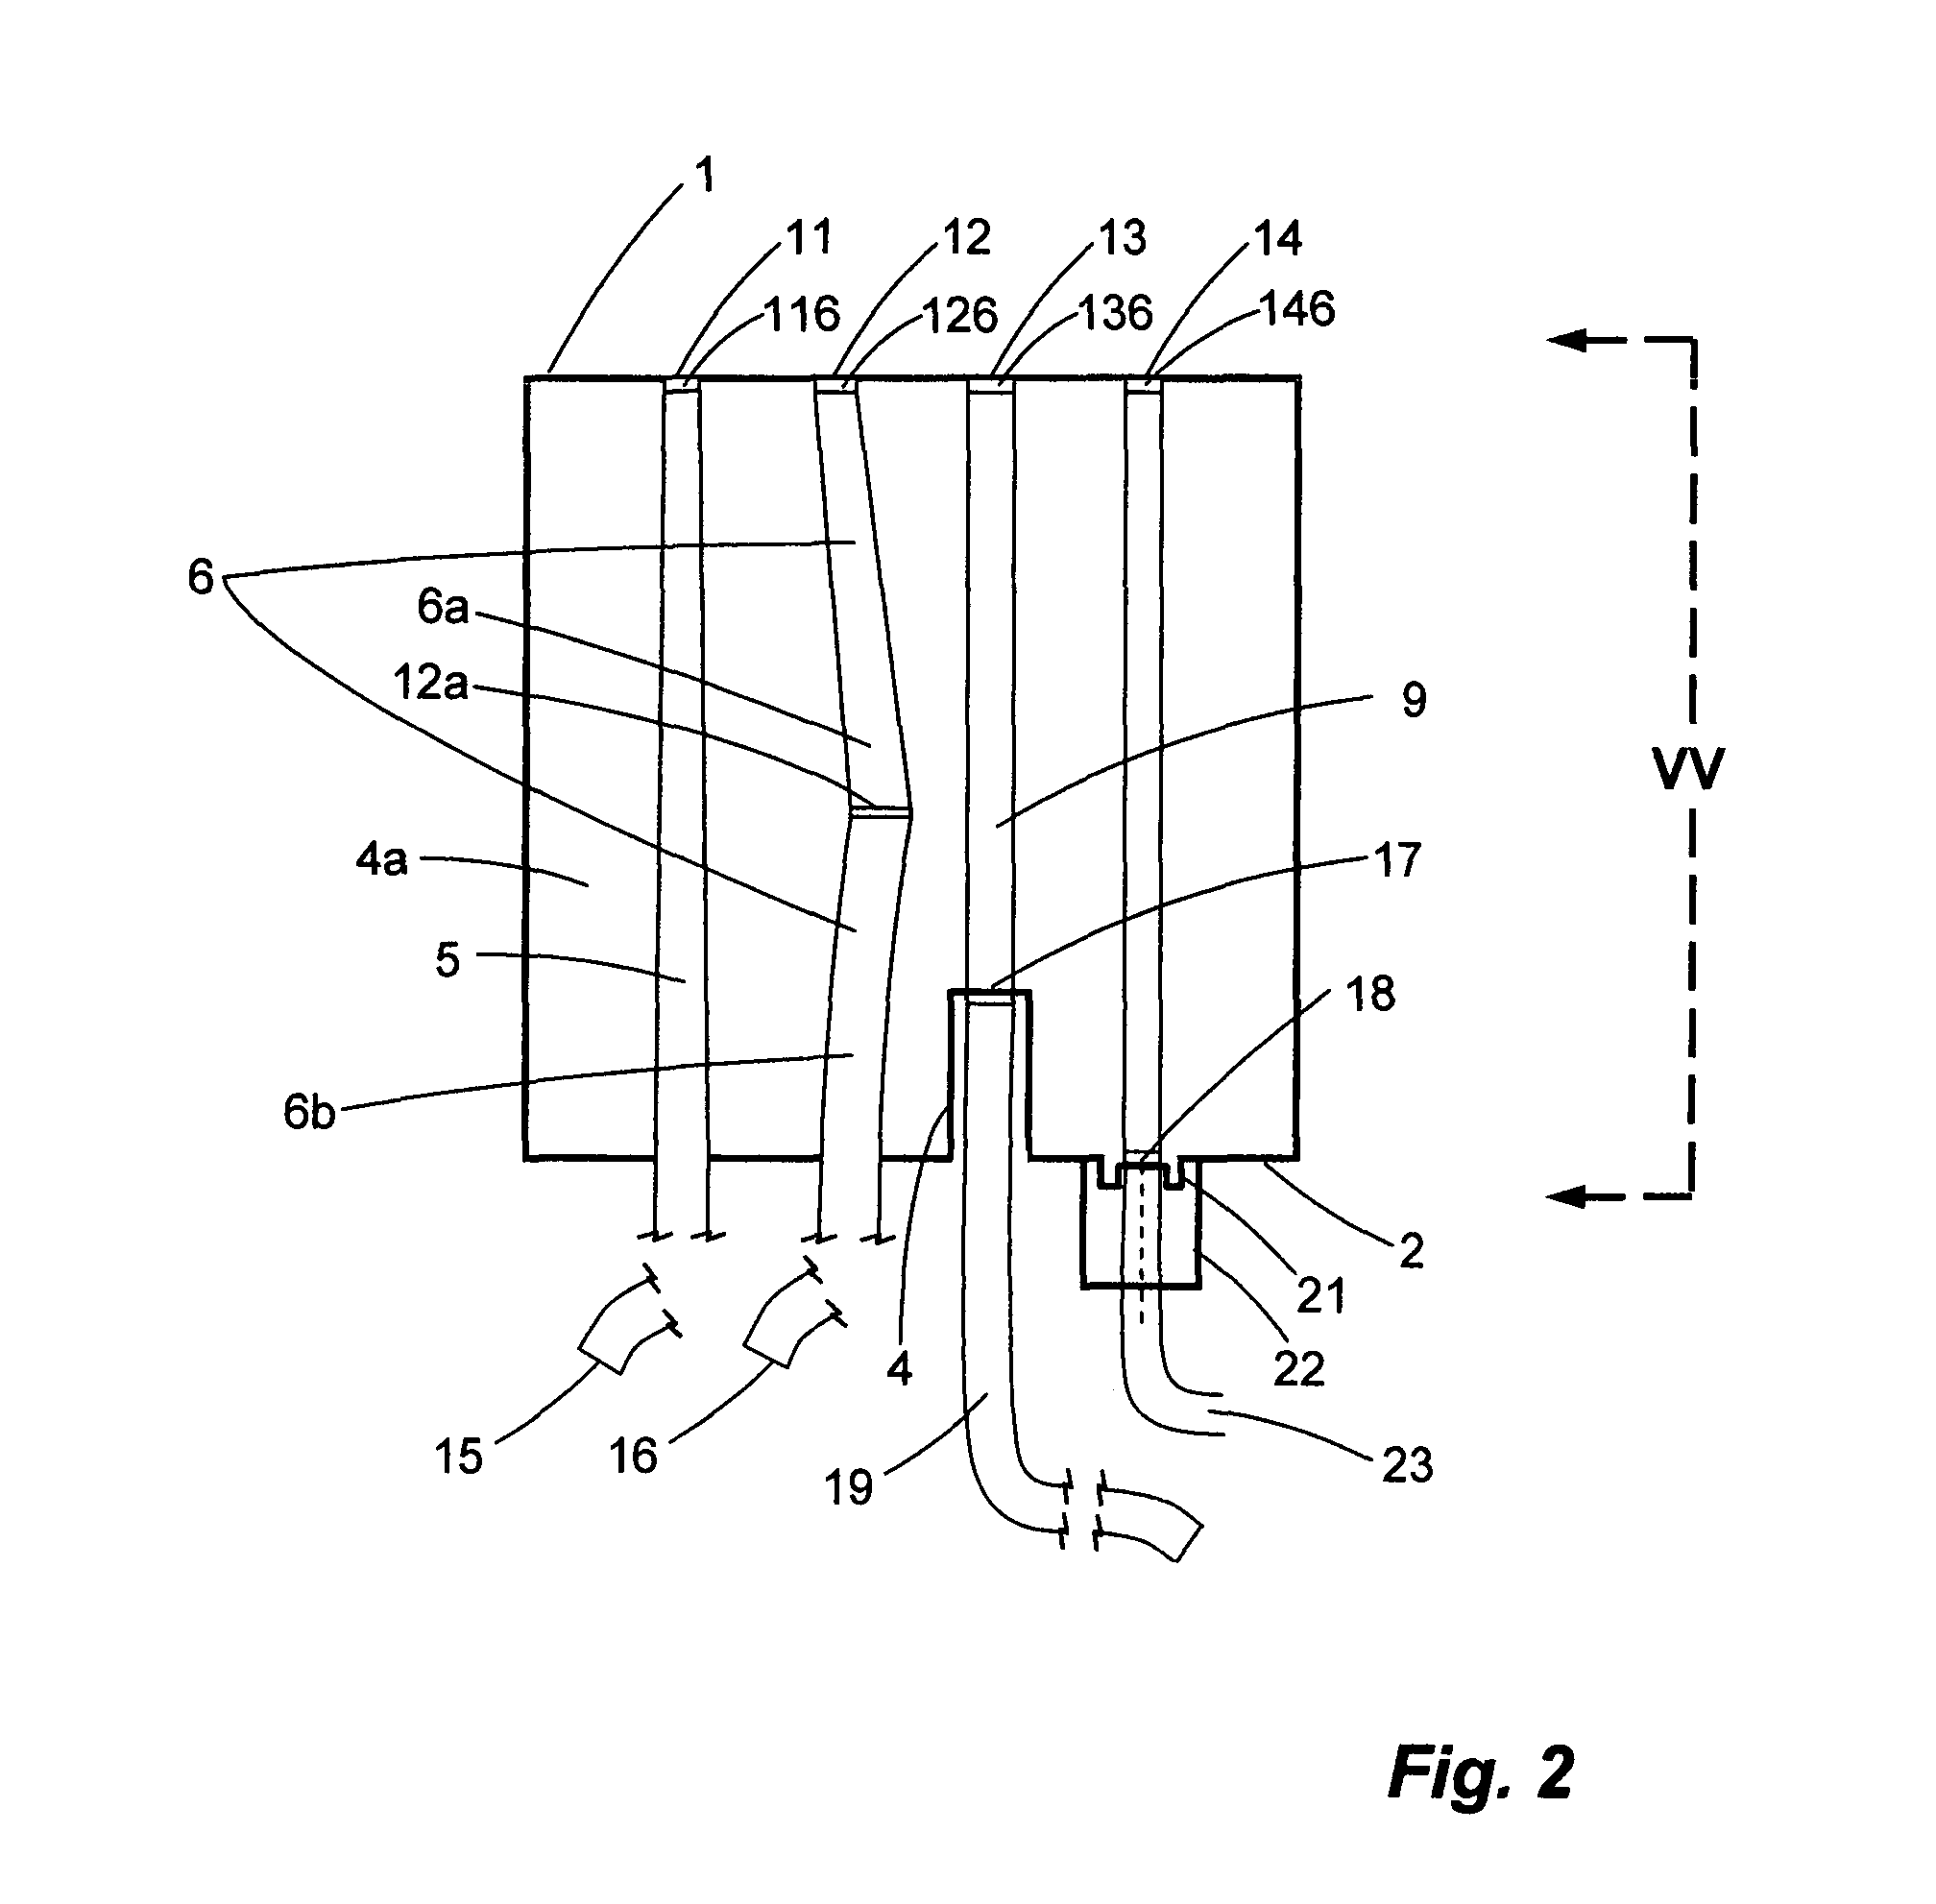 Facile production of optical communication assemblies and components